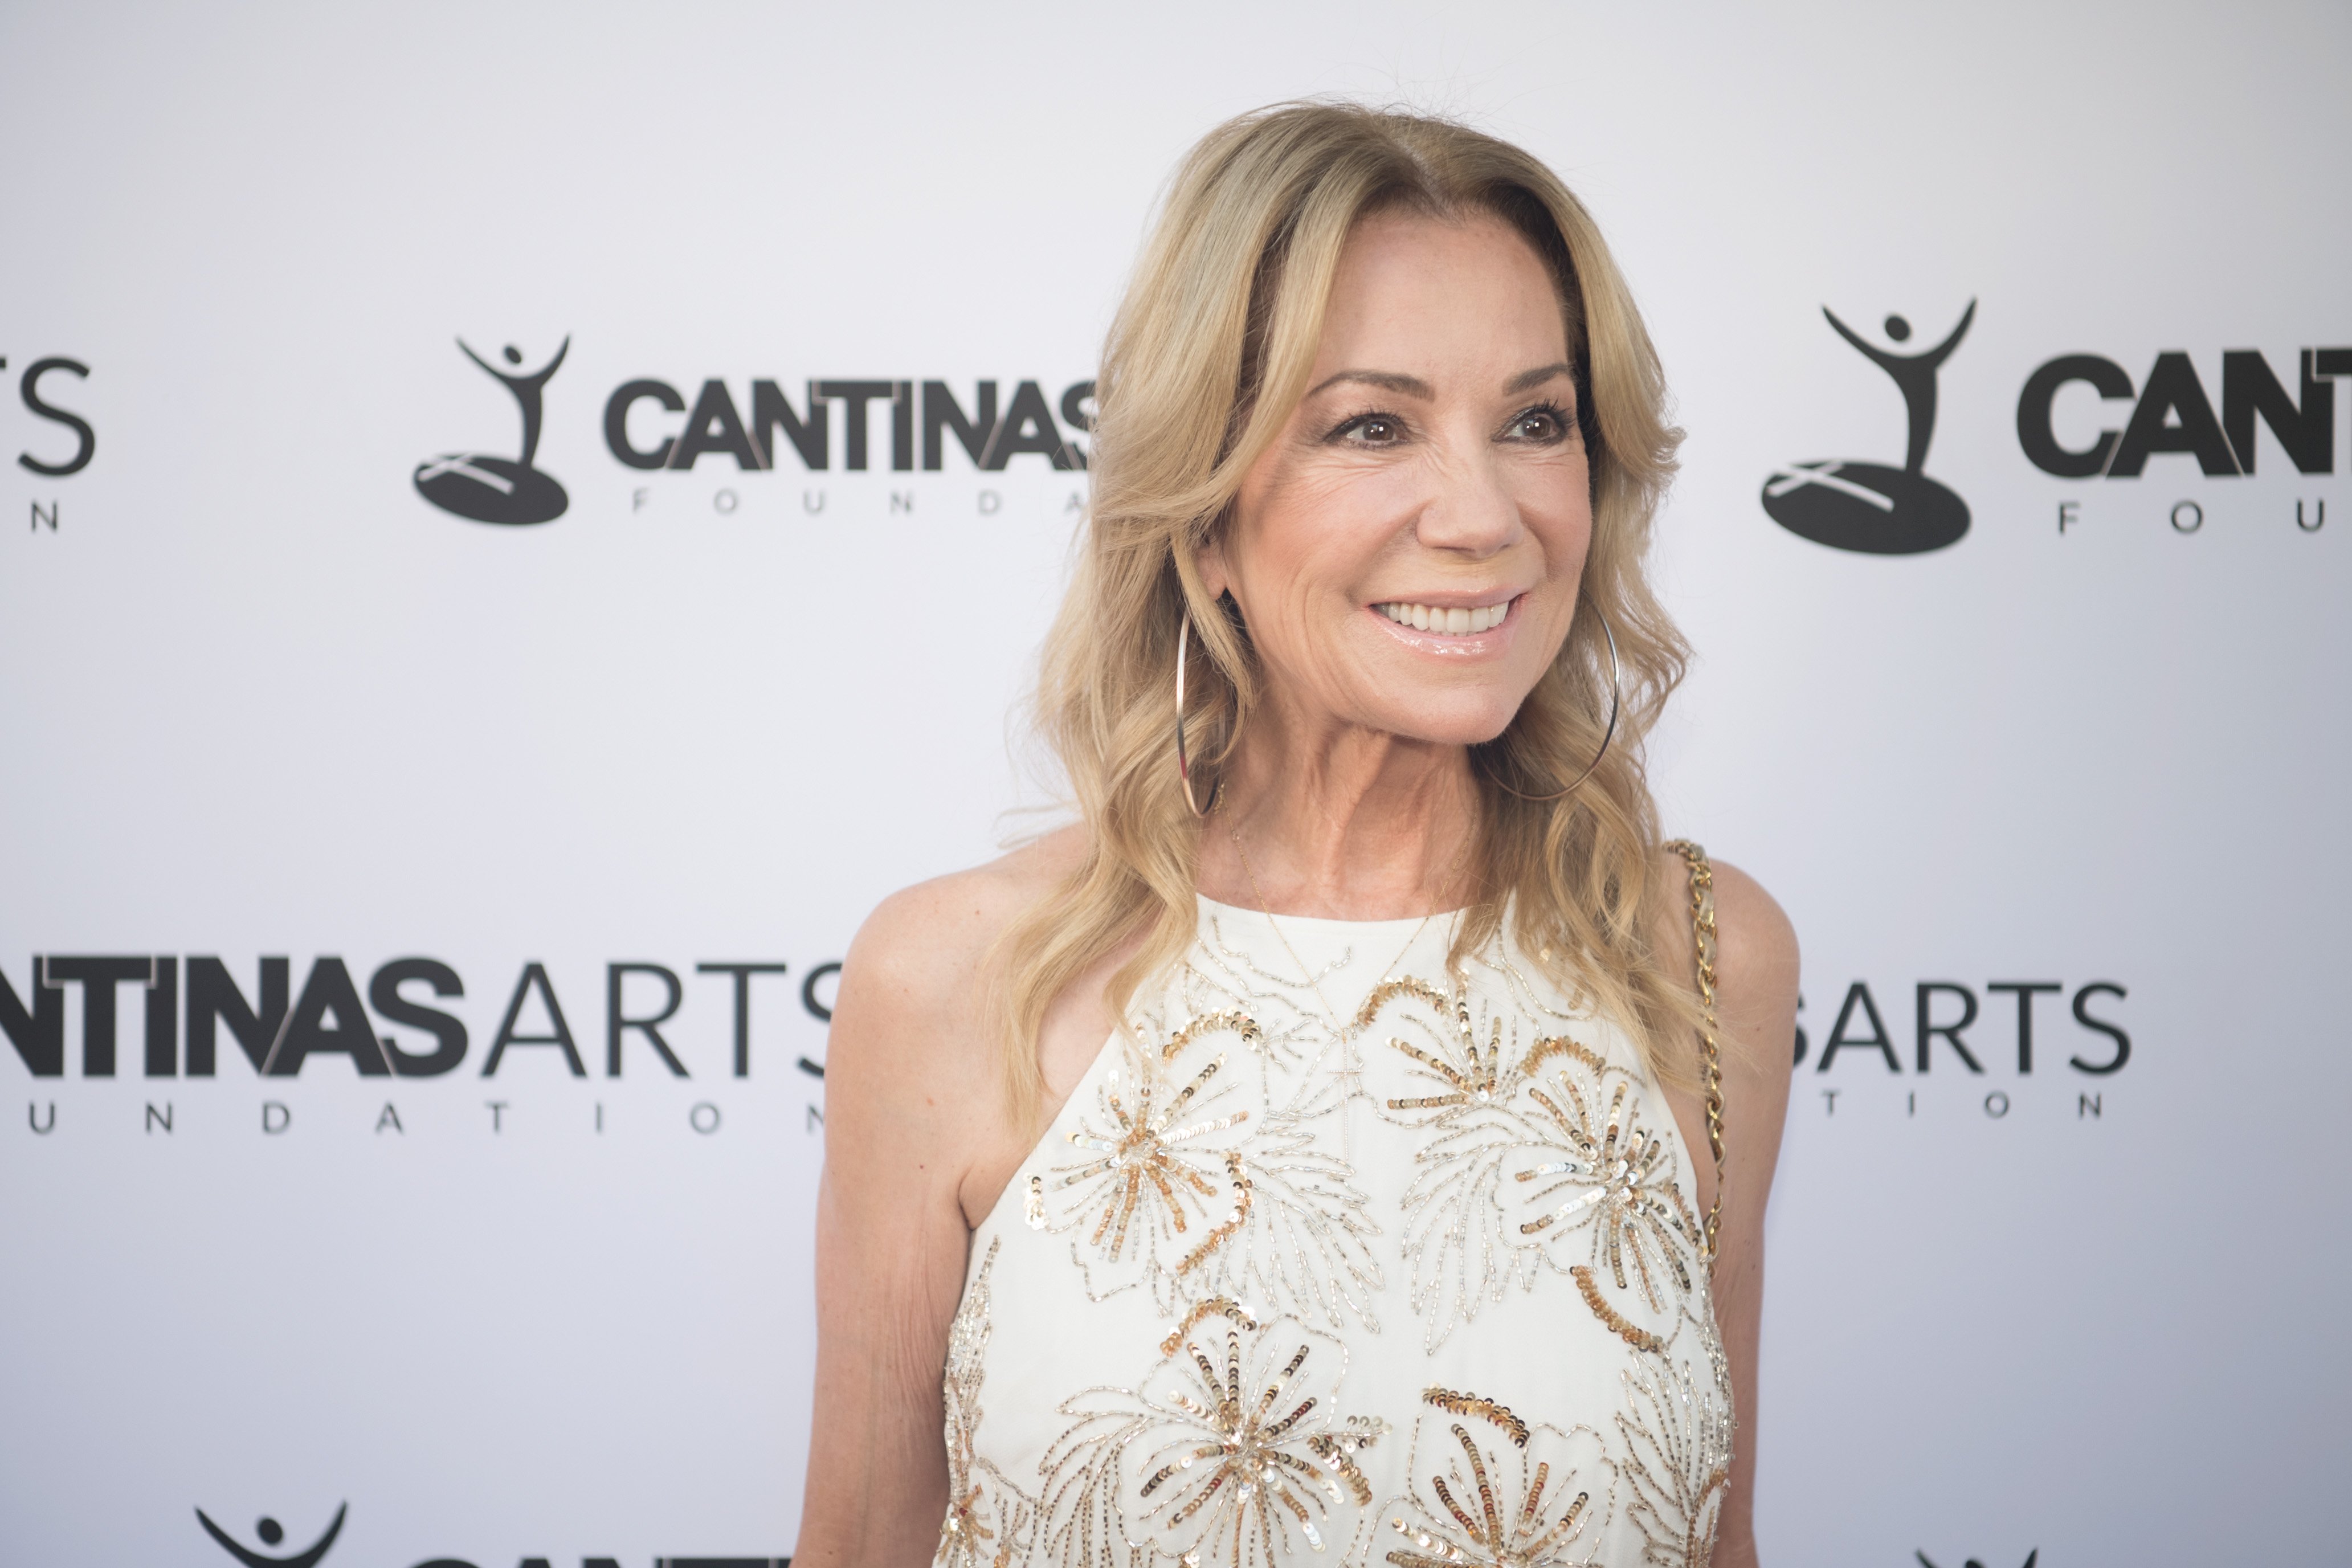 Kathie Lee Gifford arrives at The Cantinas Arts Foundation COTA Celebration of the Arts on September 15, 2018 | Photo: Getty Images